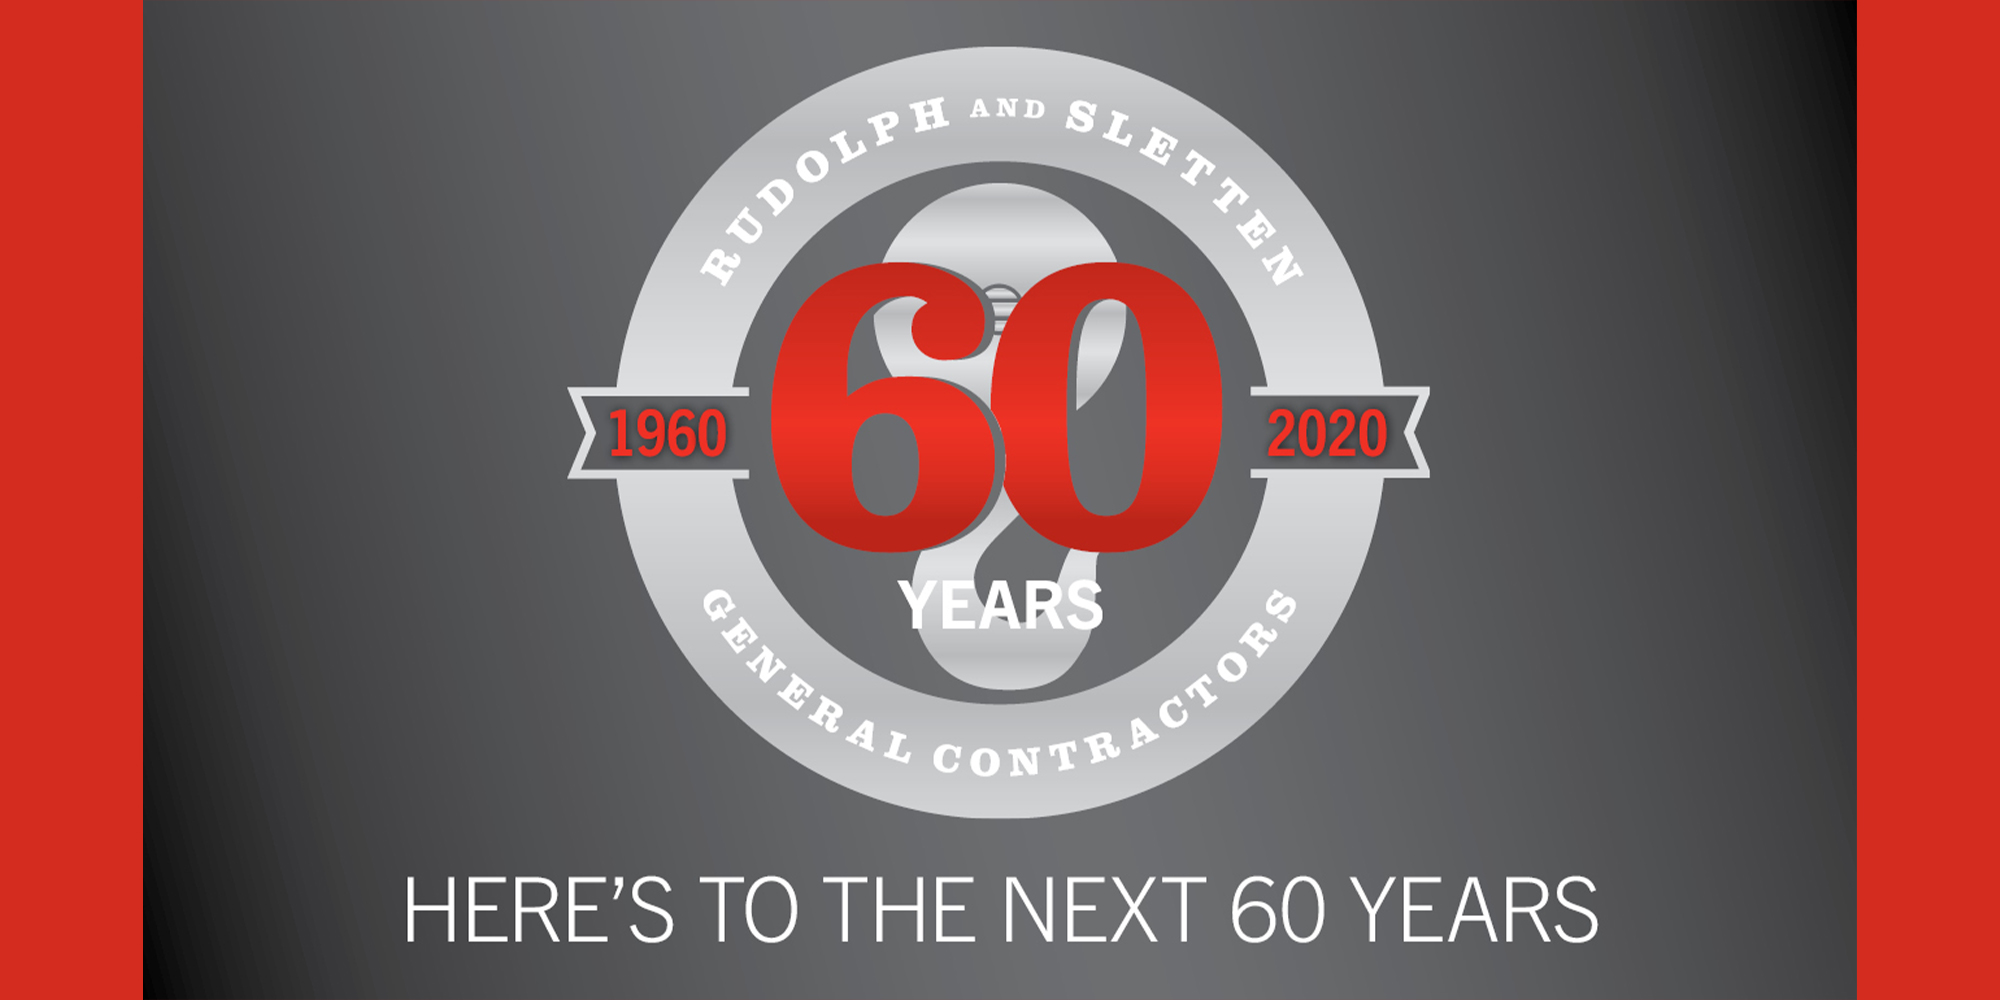 Rudolph and Sletten Celebrates 60 Years of Innovative Construction